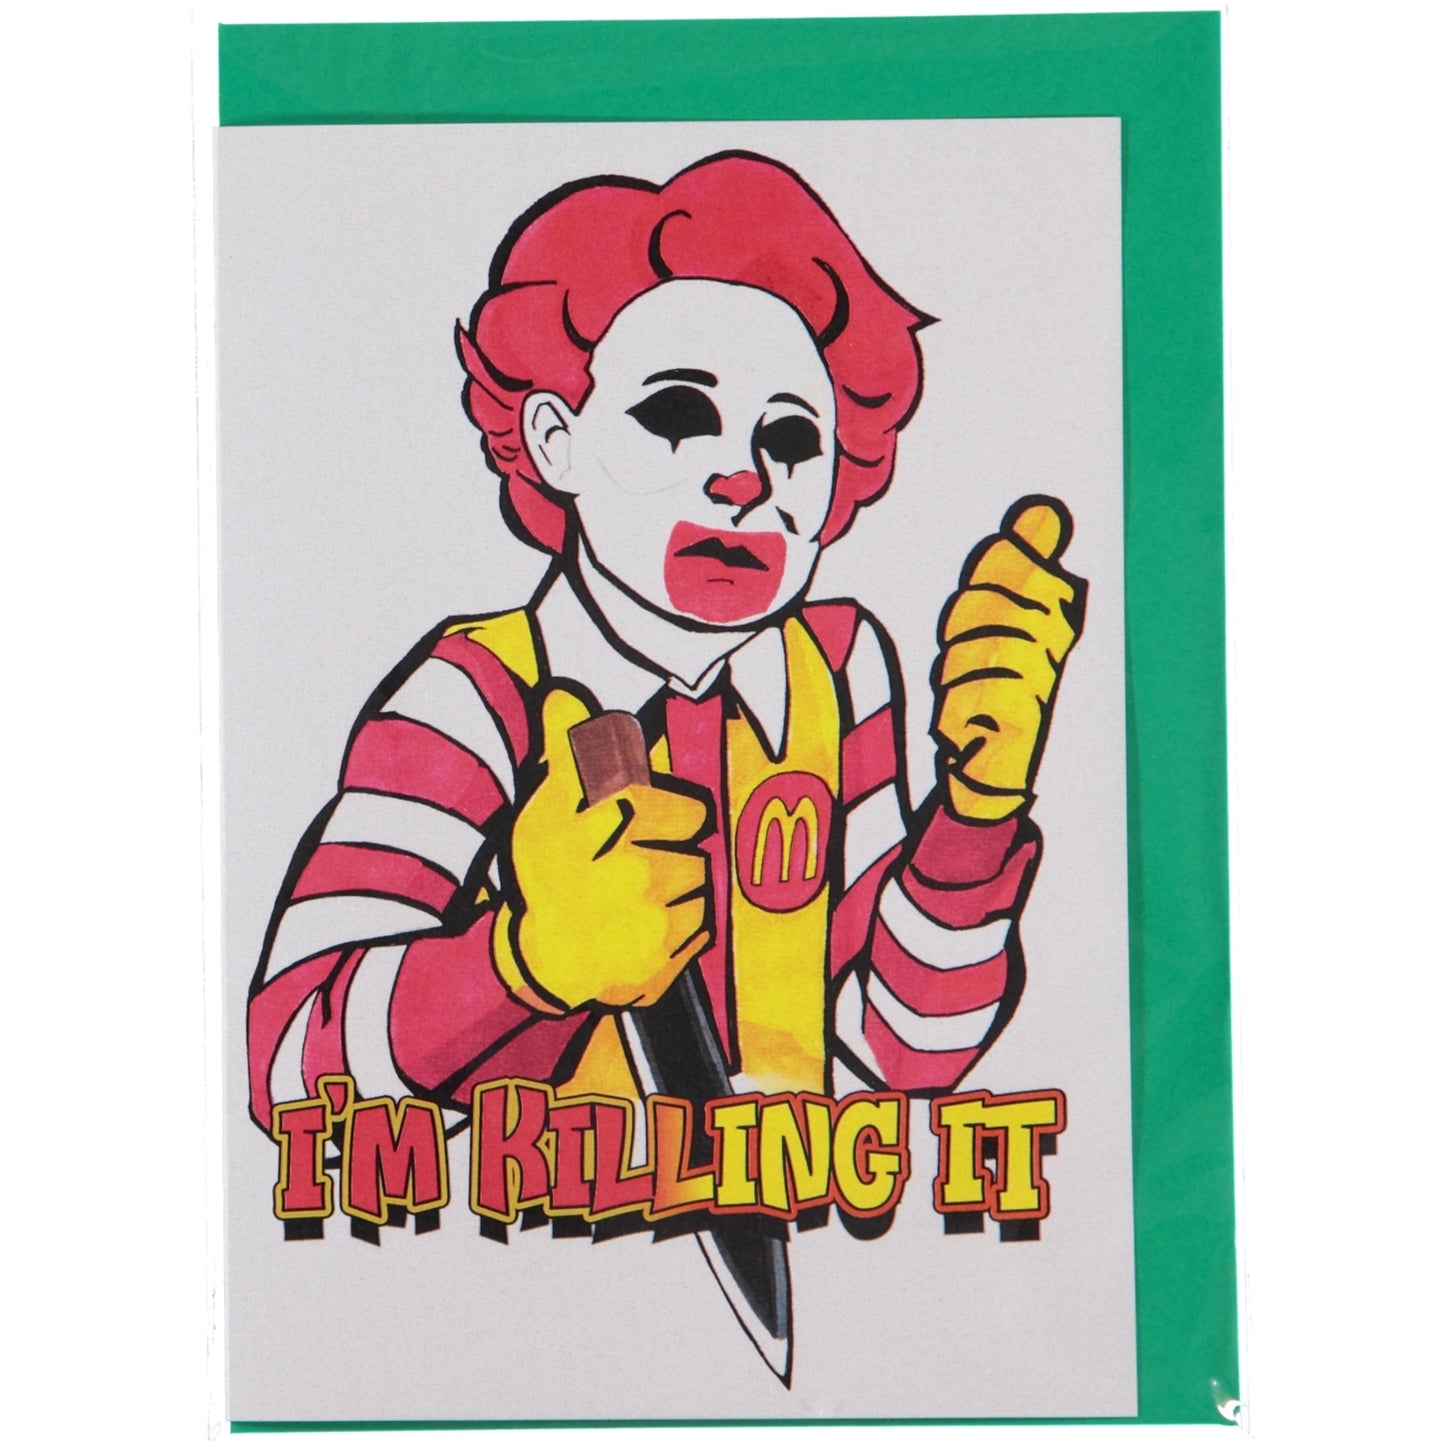 Delicious Again Peter Greeting Card - McMyers